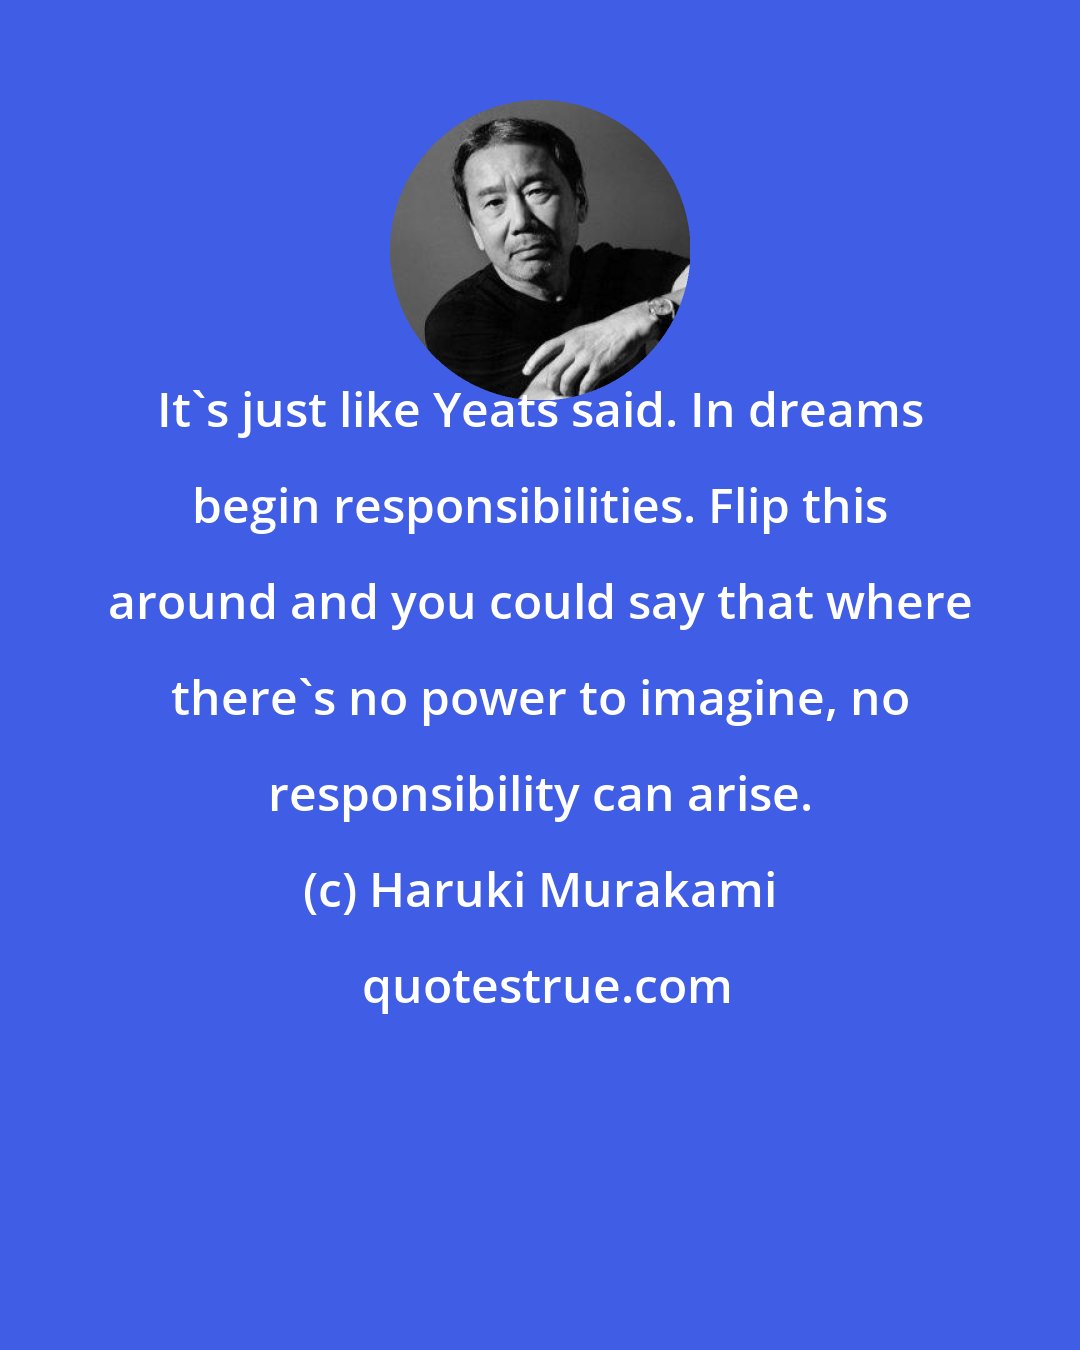 Haruki Murakami: It's just like Yeats said. In dreams begin responsibilities. Flip this around and you could say that where there's no power to imagine, no responsibility can arise.